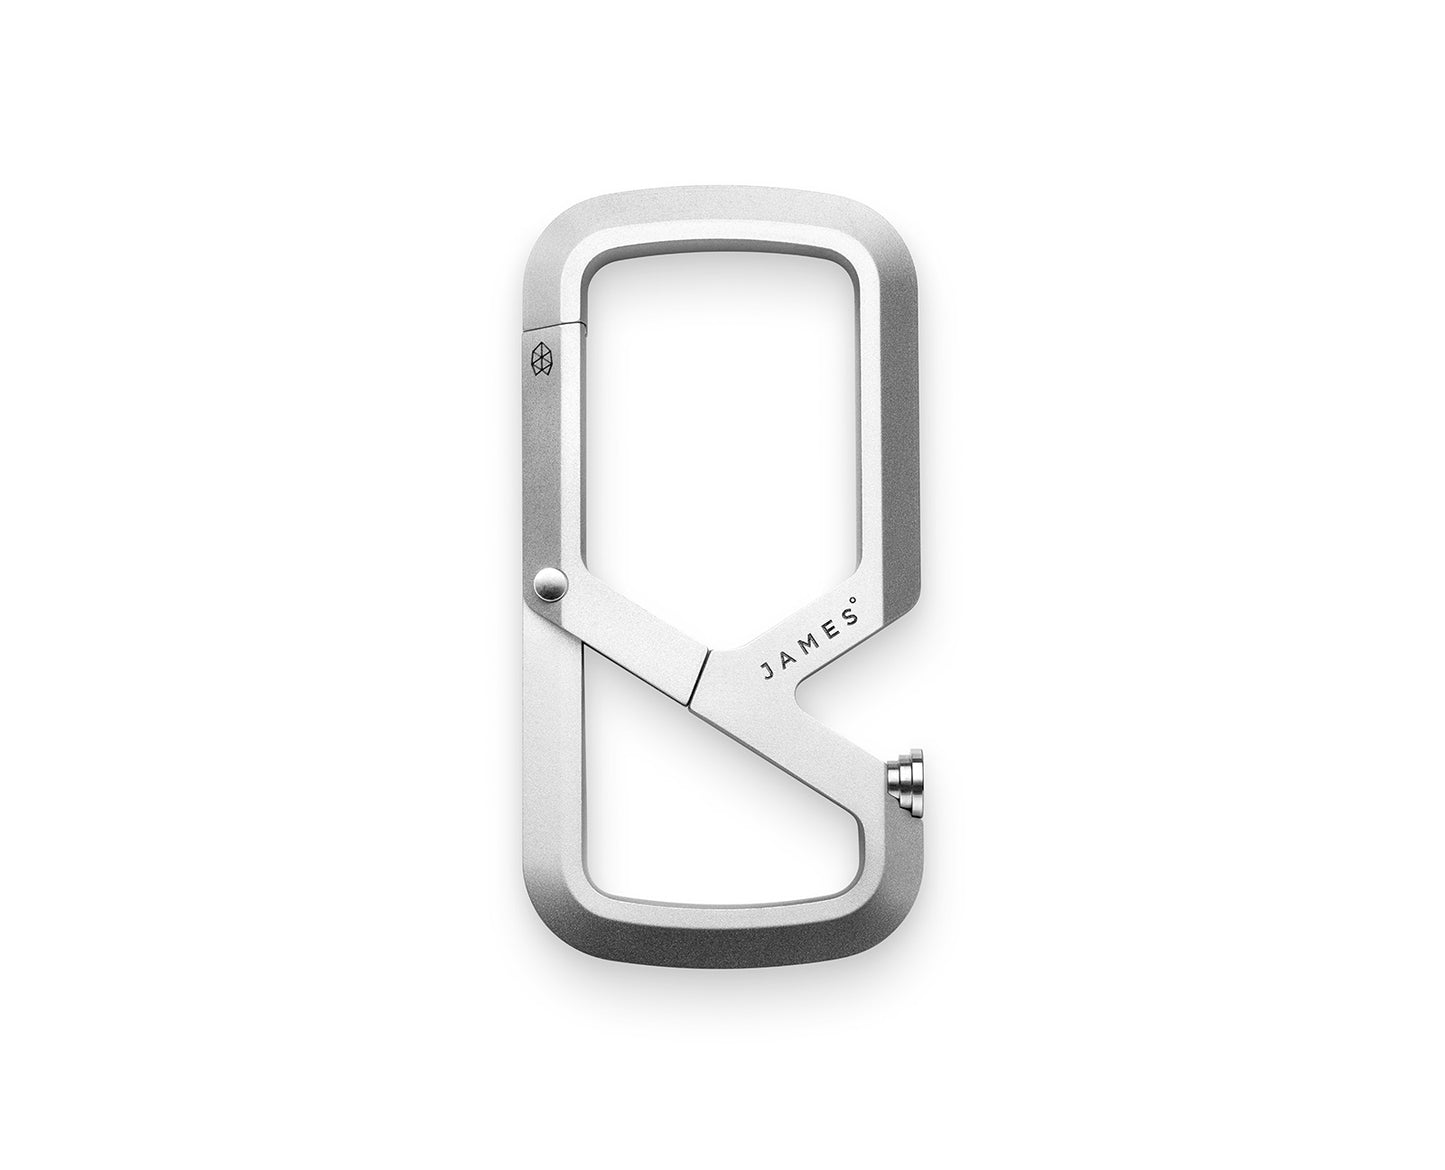 The Mehlville carabiner in silver